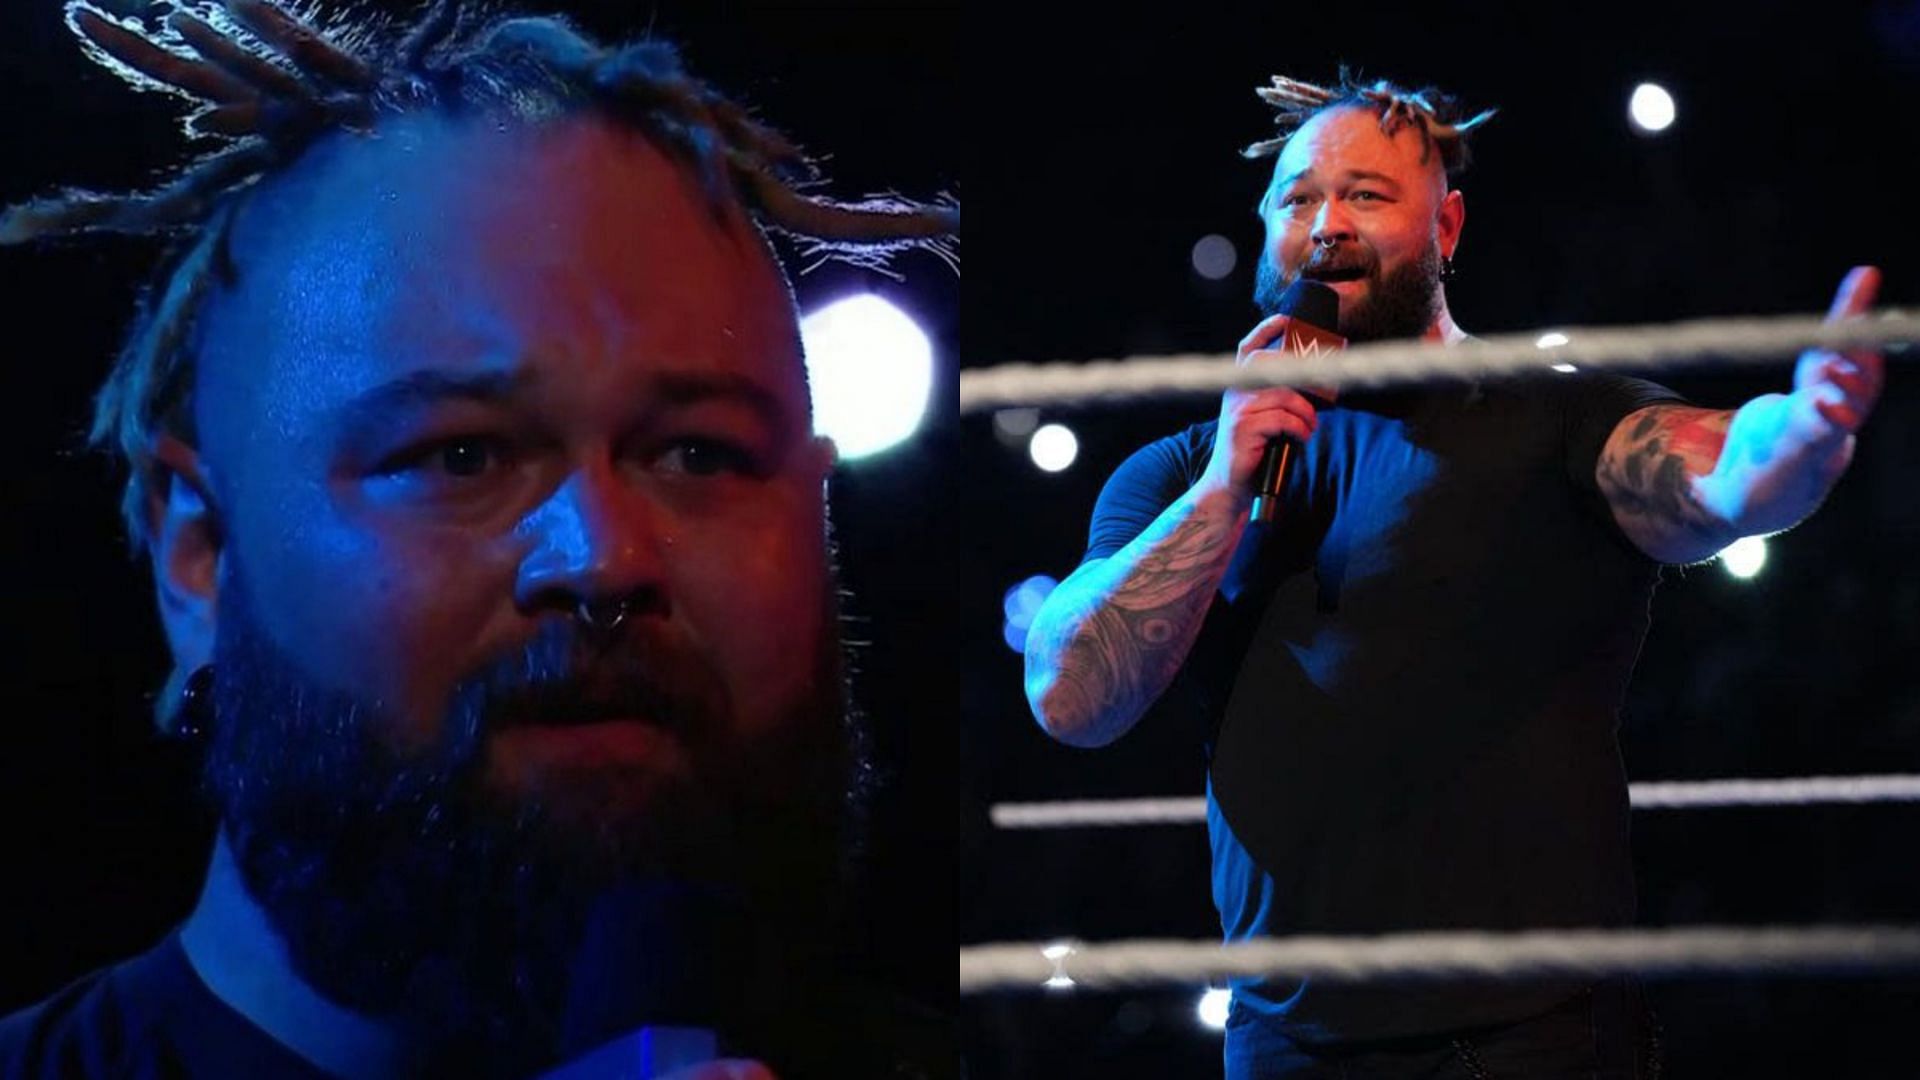 Bray Wyatt is currently on the SmackDown roster